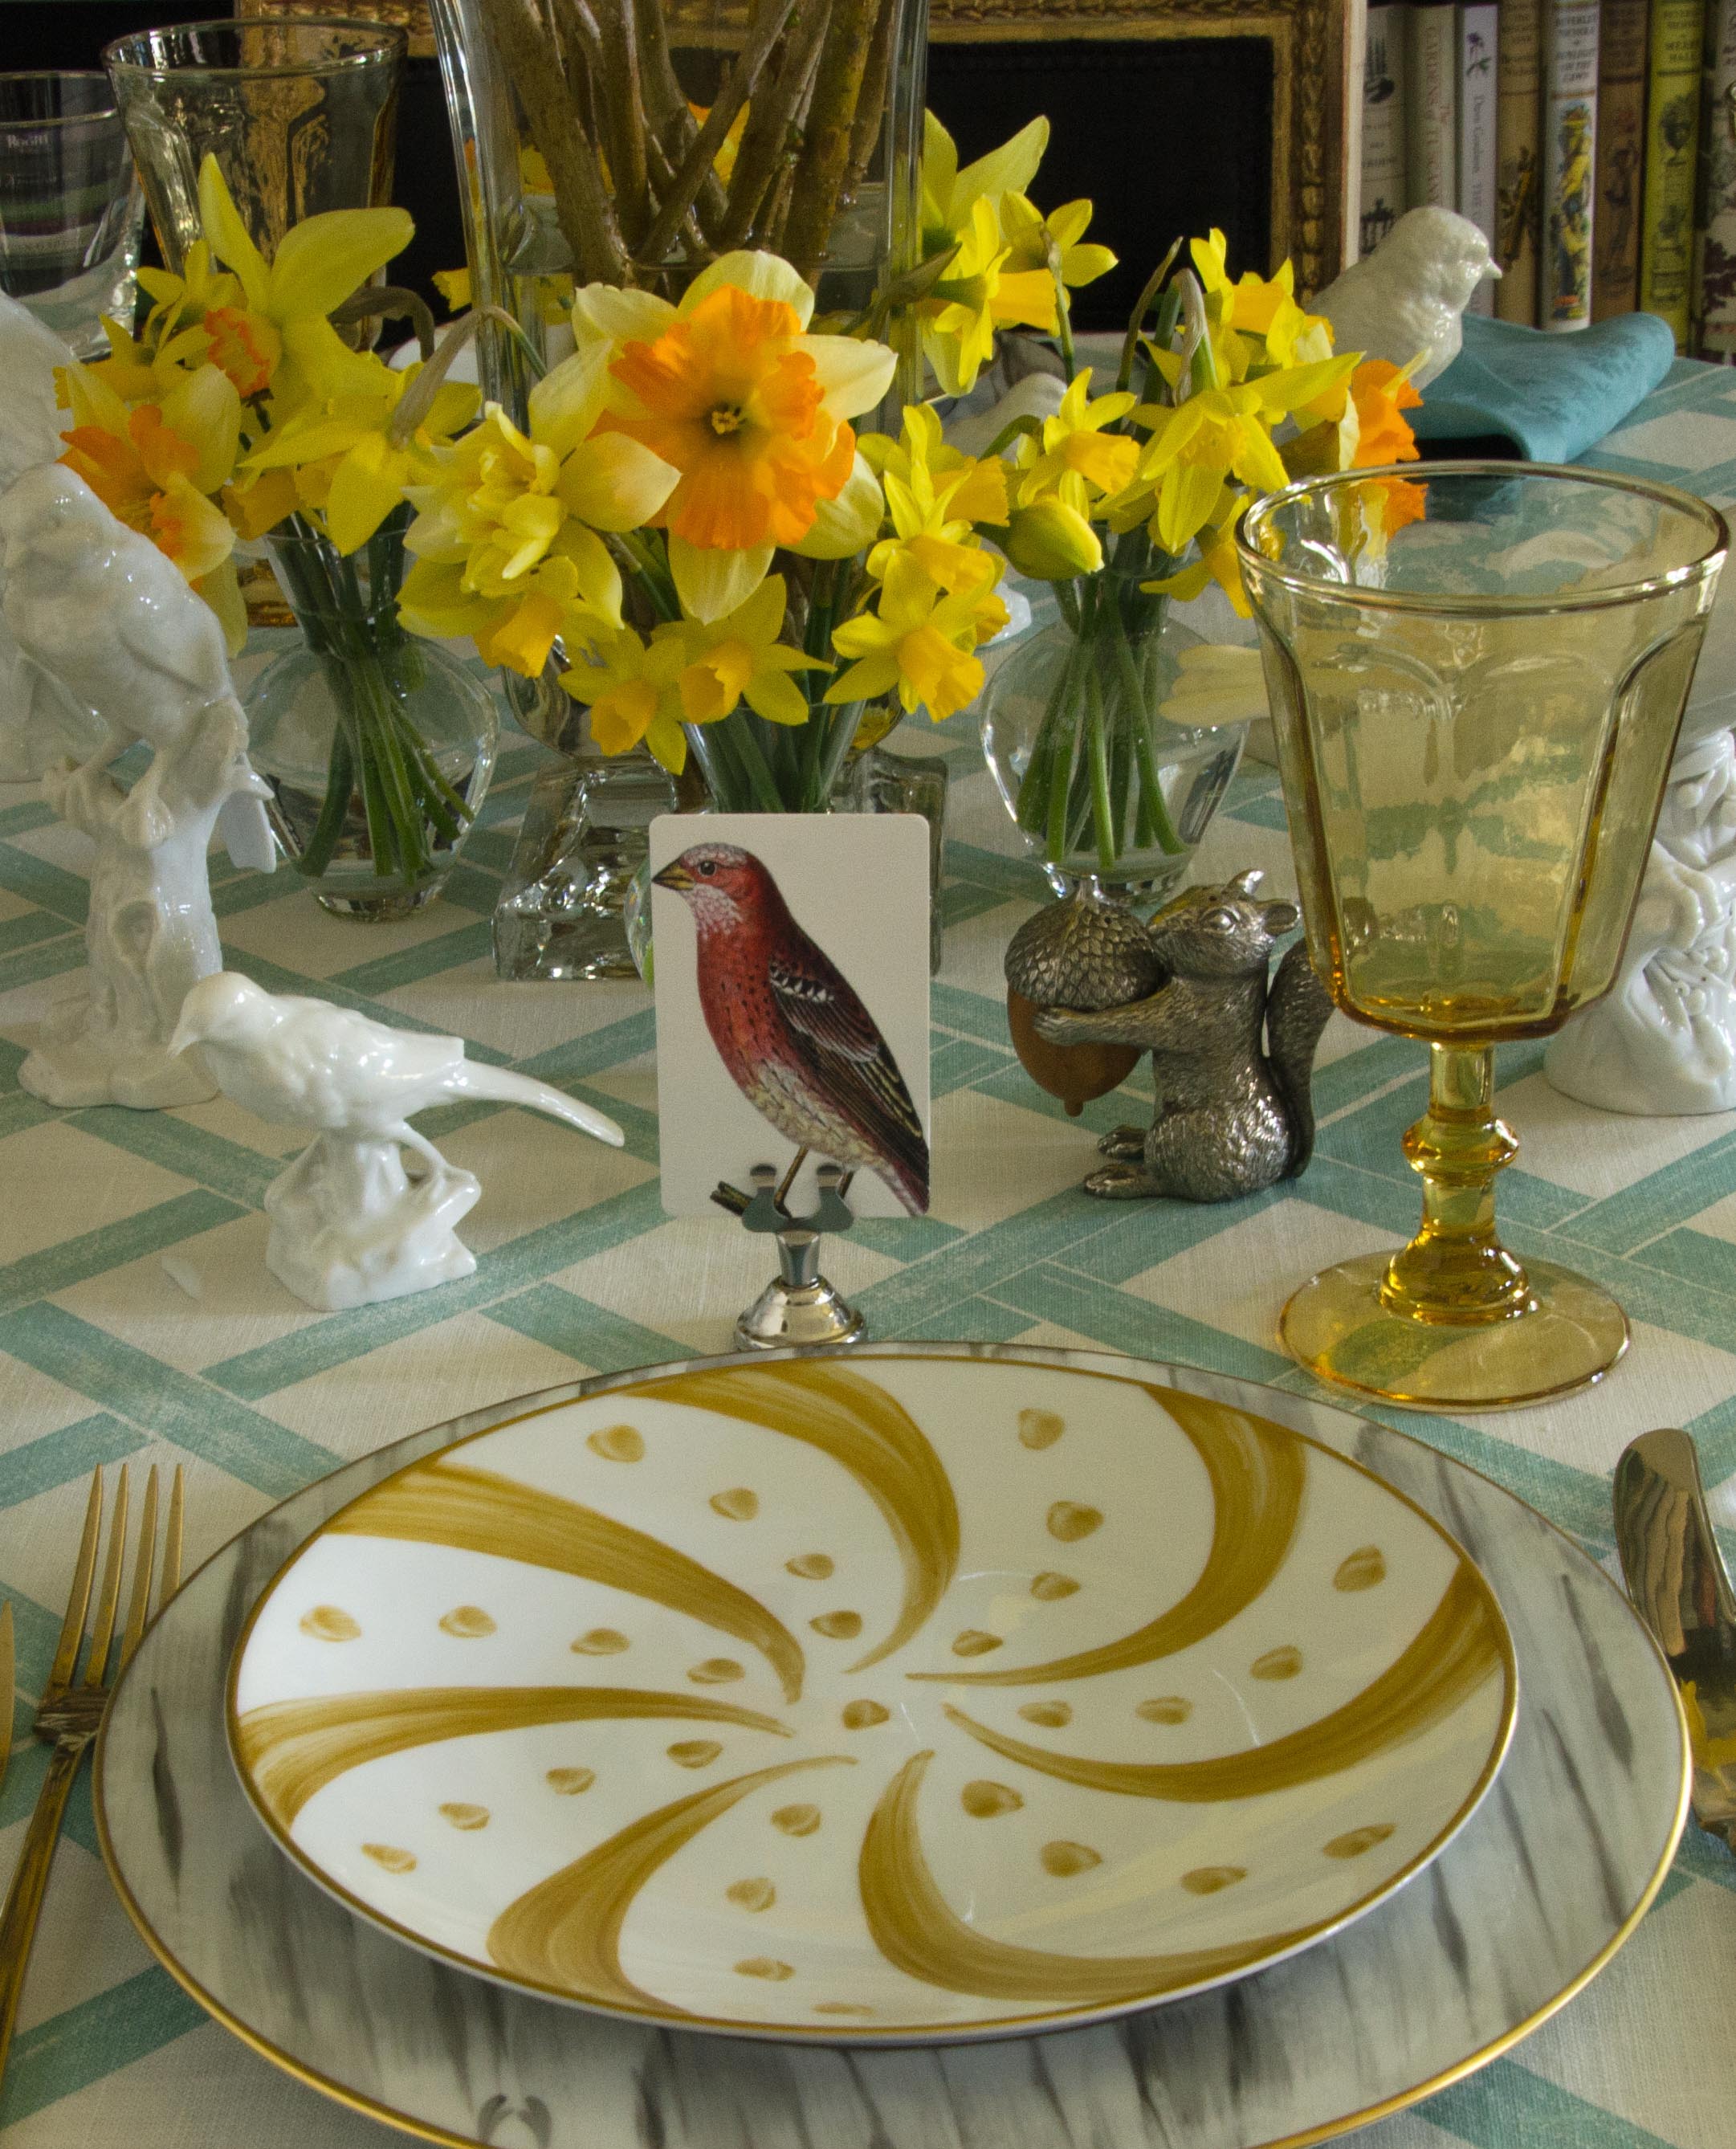 The Punctilious Mr. P's Place Cards Co. "Chromatic Cuckoo" Red Bird custom place card on "simple holder" in silver on China Pattern with Hand Painted Gold Border with Daffodil flower arrangement